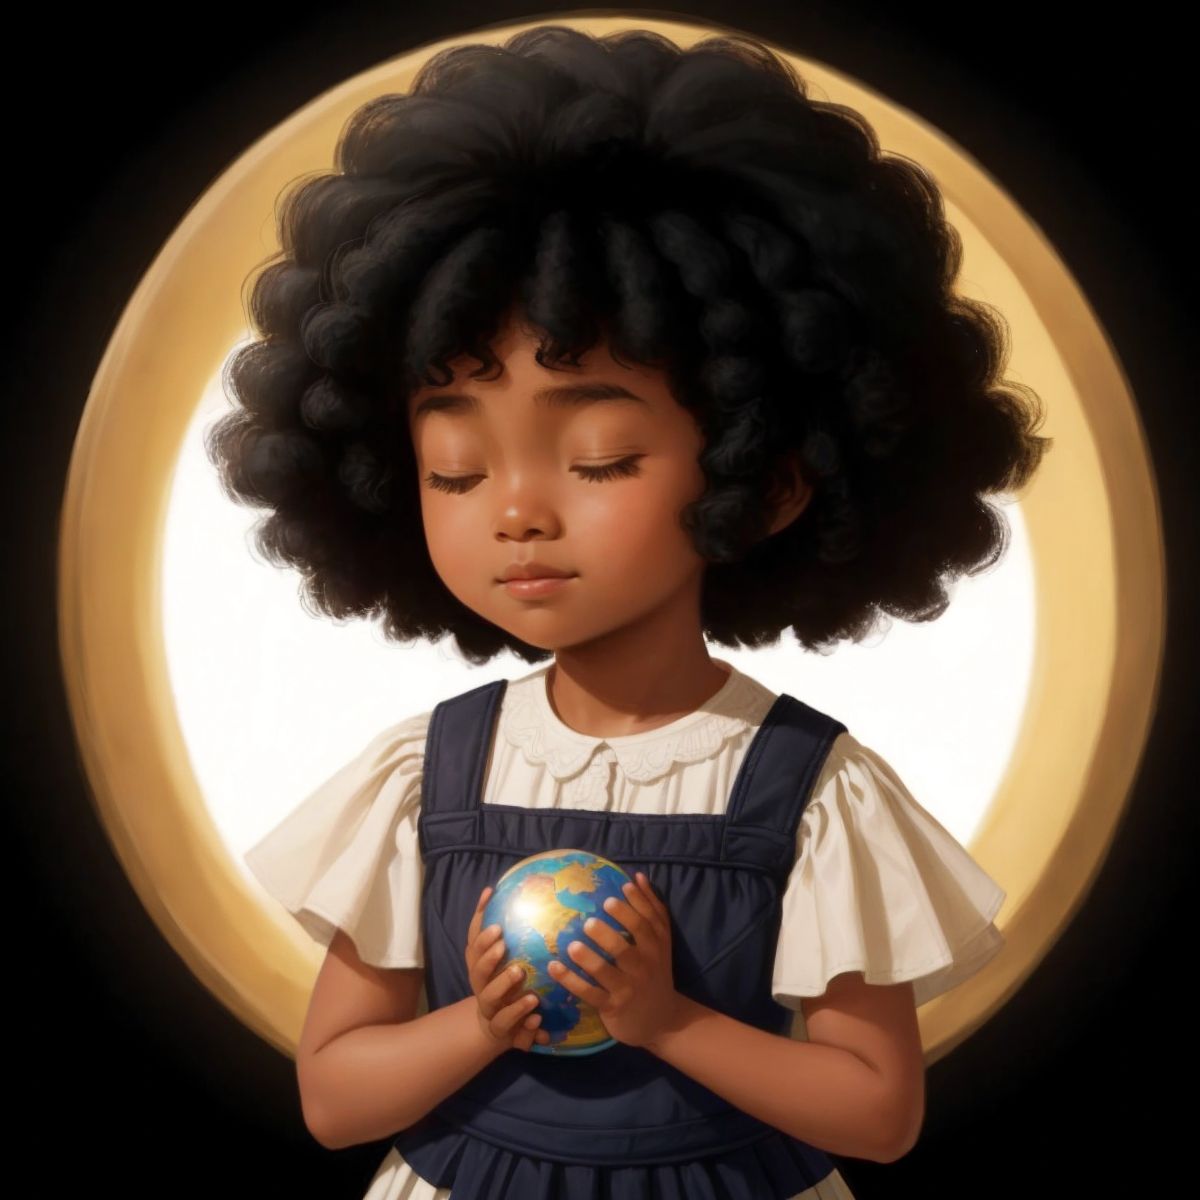 Zariah holding a small globe in her hands, eyes closed, with a hopeful expression as she prays for peace.